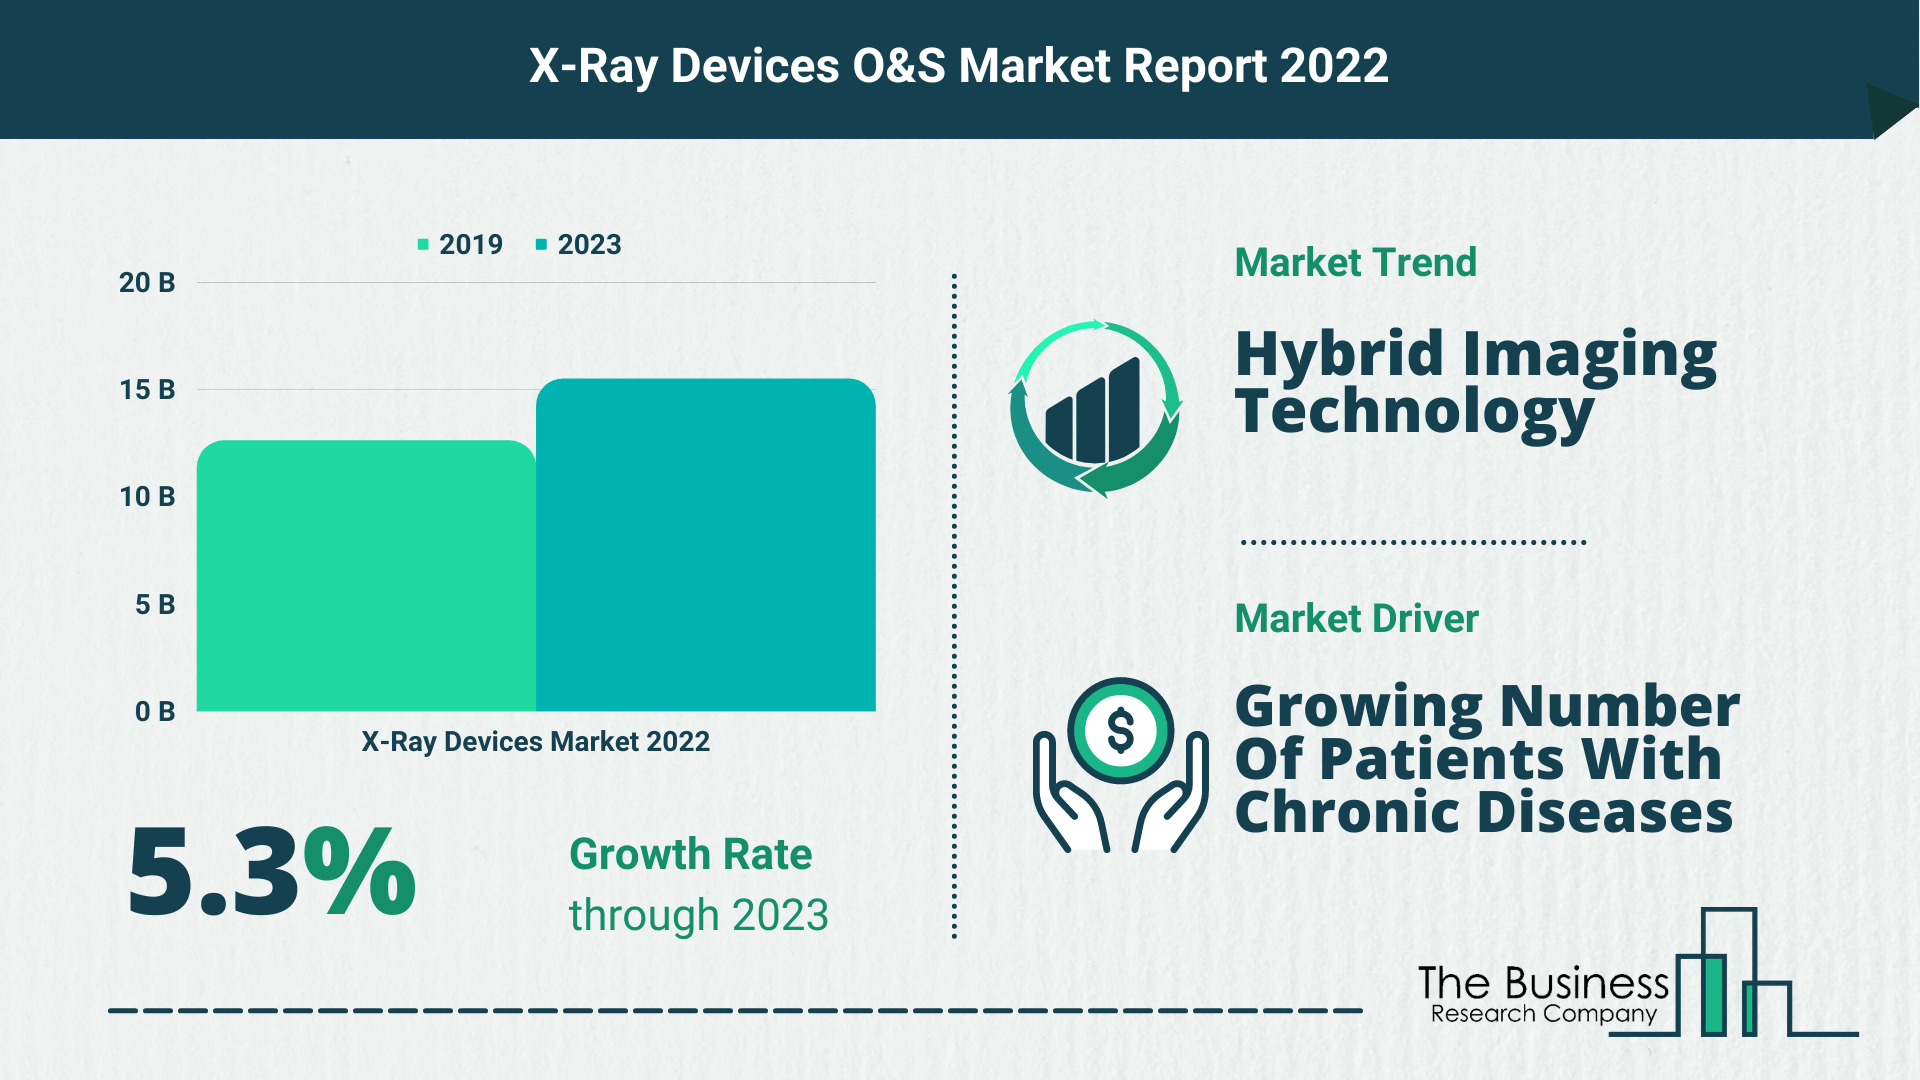 Global X-Ray Devices Market 2022 – Market Opportunities And Strategies